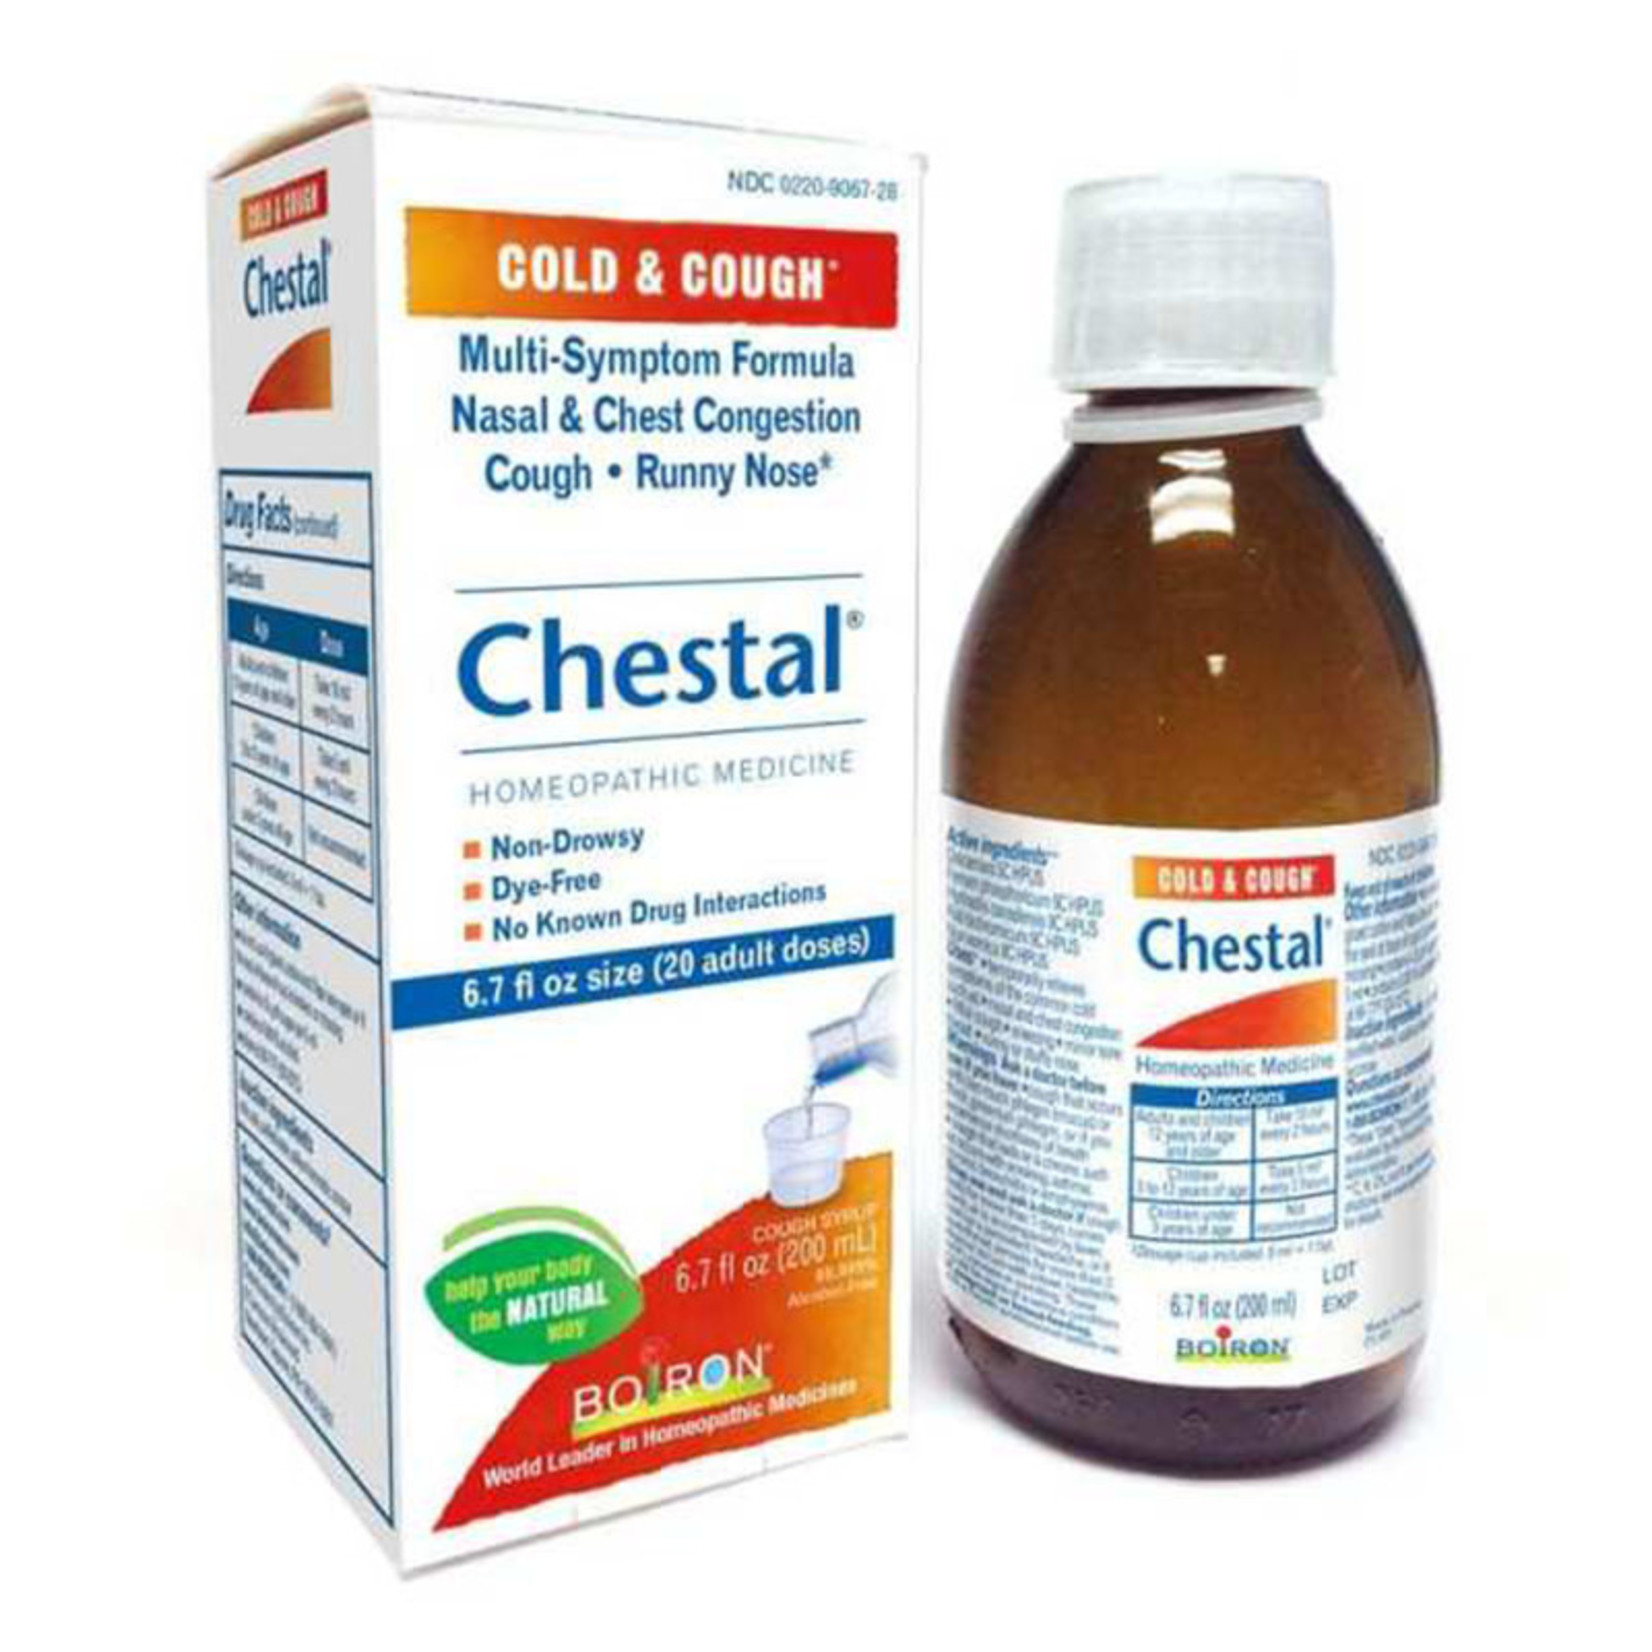 Chestal - Cough and Congestion